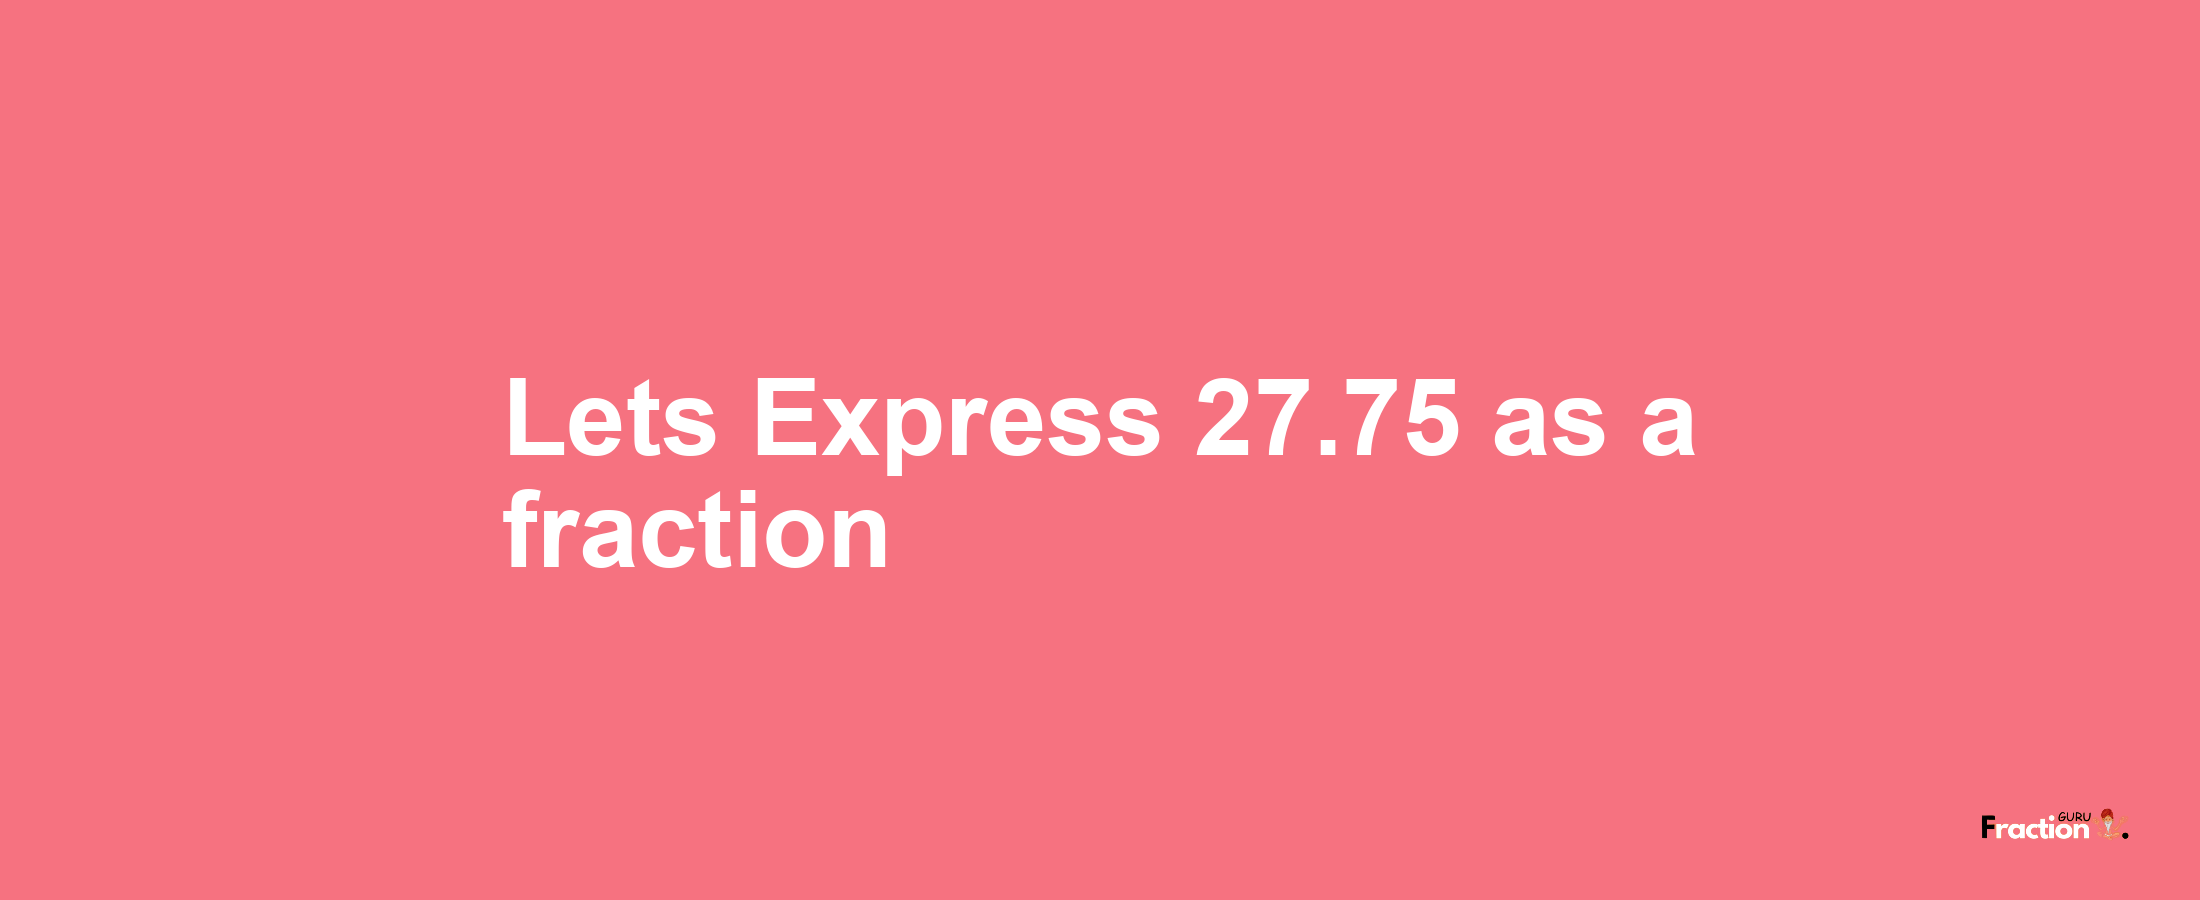 Lets Express 27.75 as afraction